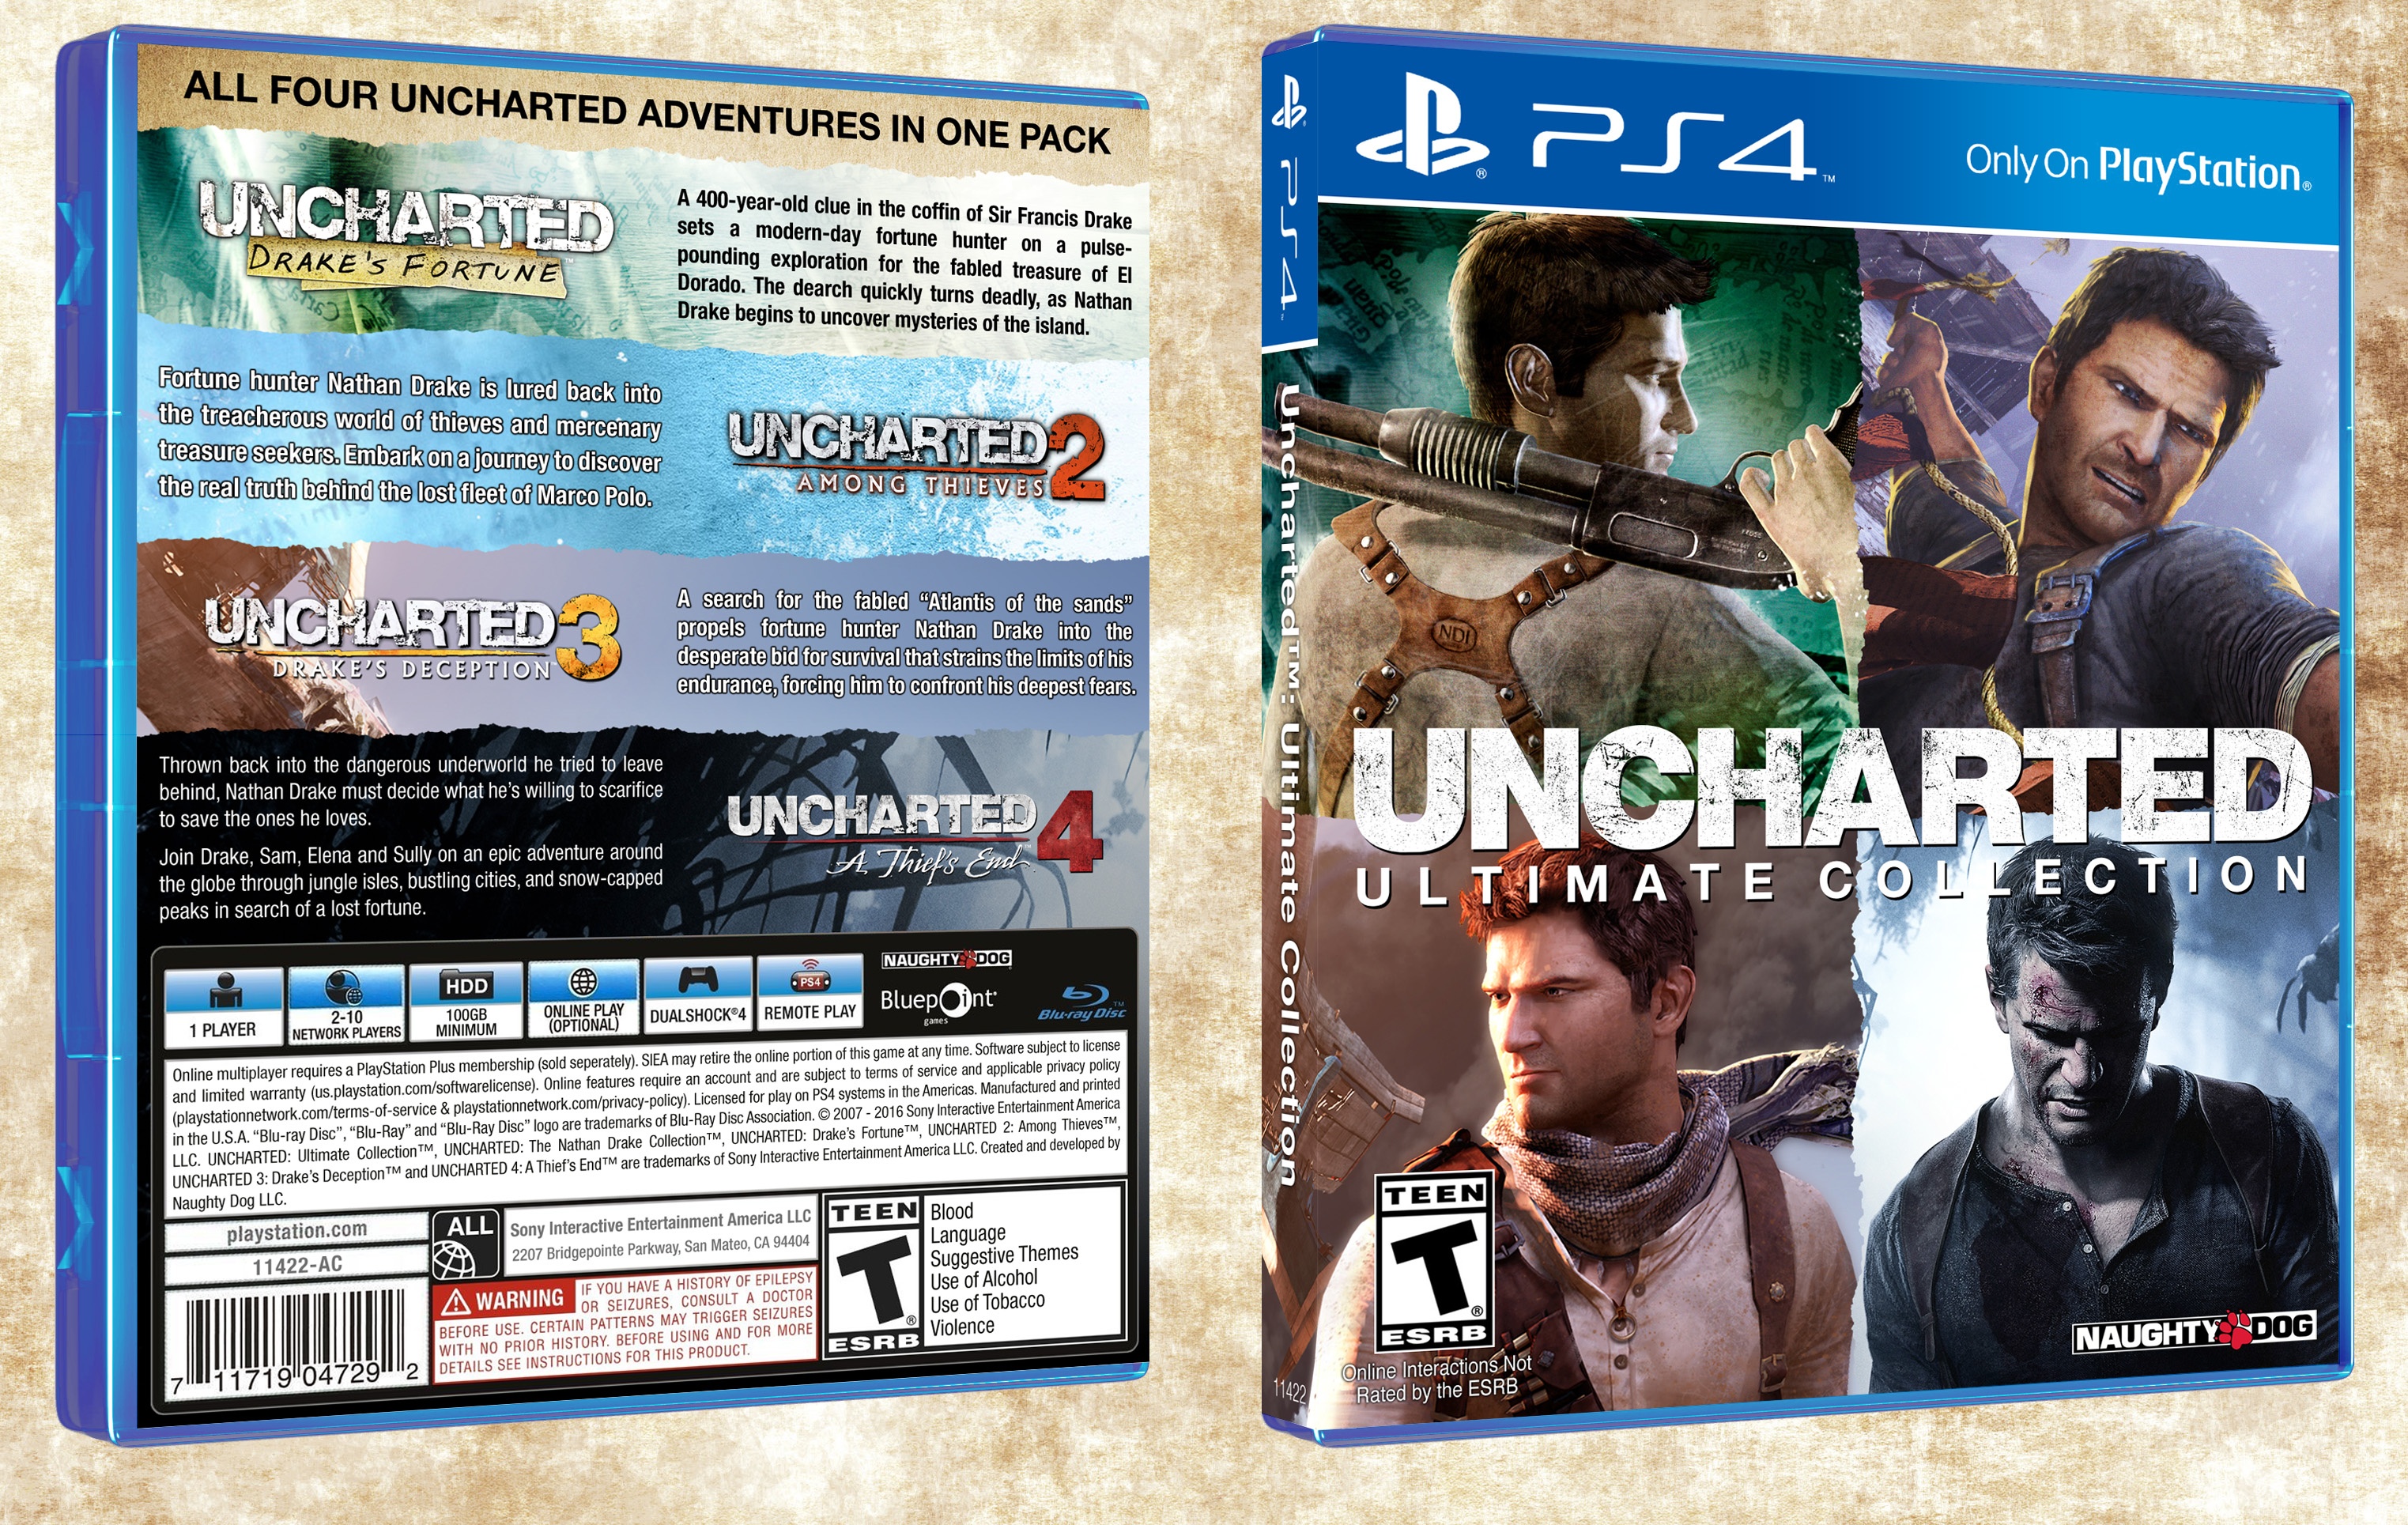 Uncharted: Ultimate Collection box cover